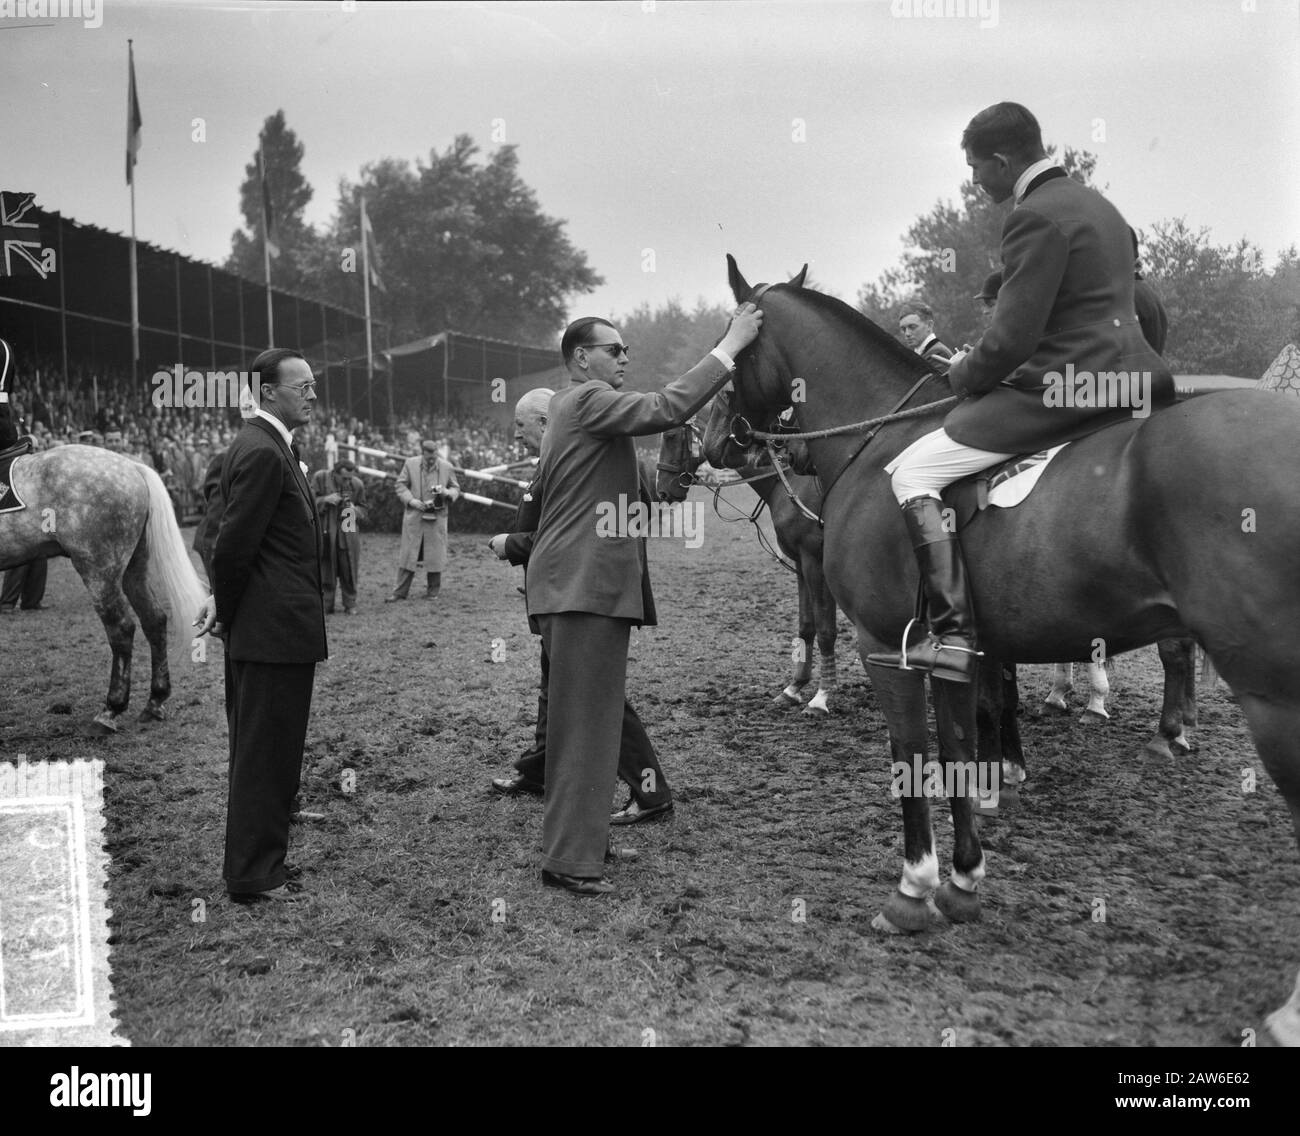 Last day Concours Hippique Rotterdam. English team Date: September 2, 1956 Location: Rotterdam, South Holland Keywords: horses, riders Stock Photo